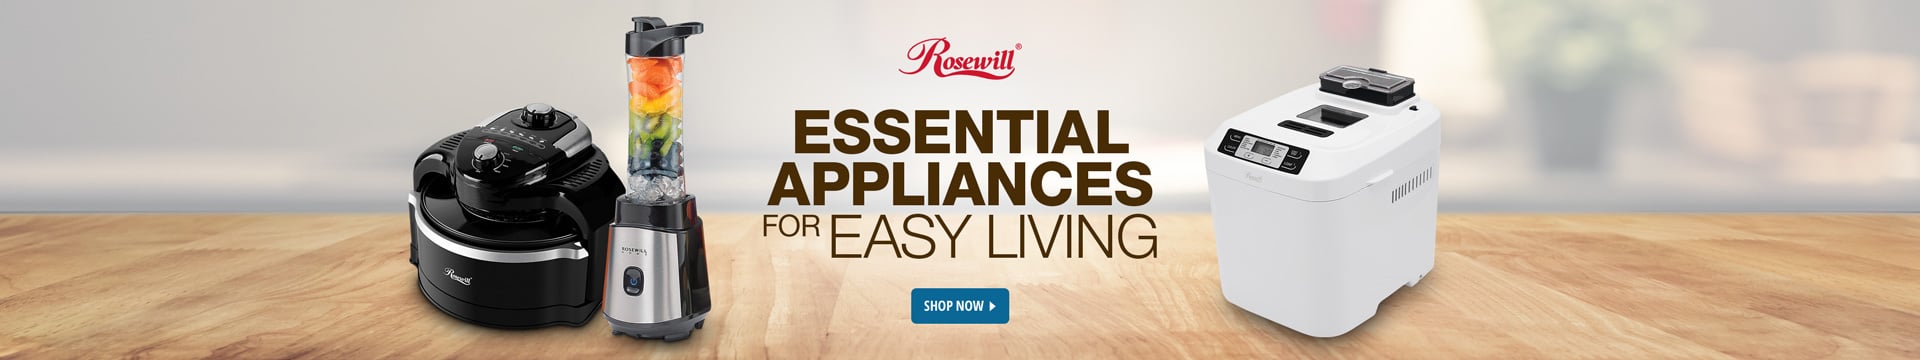 Rosewill - Essential Appliances for Easy Living